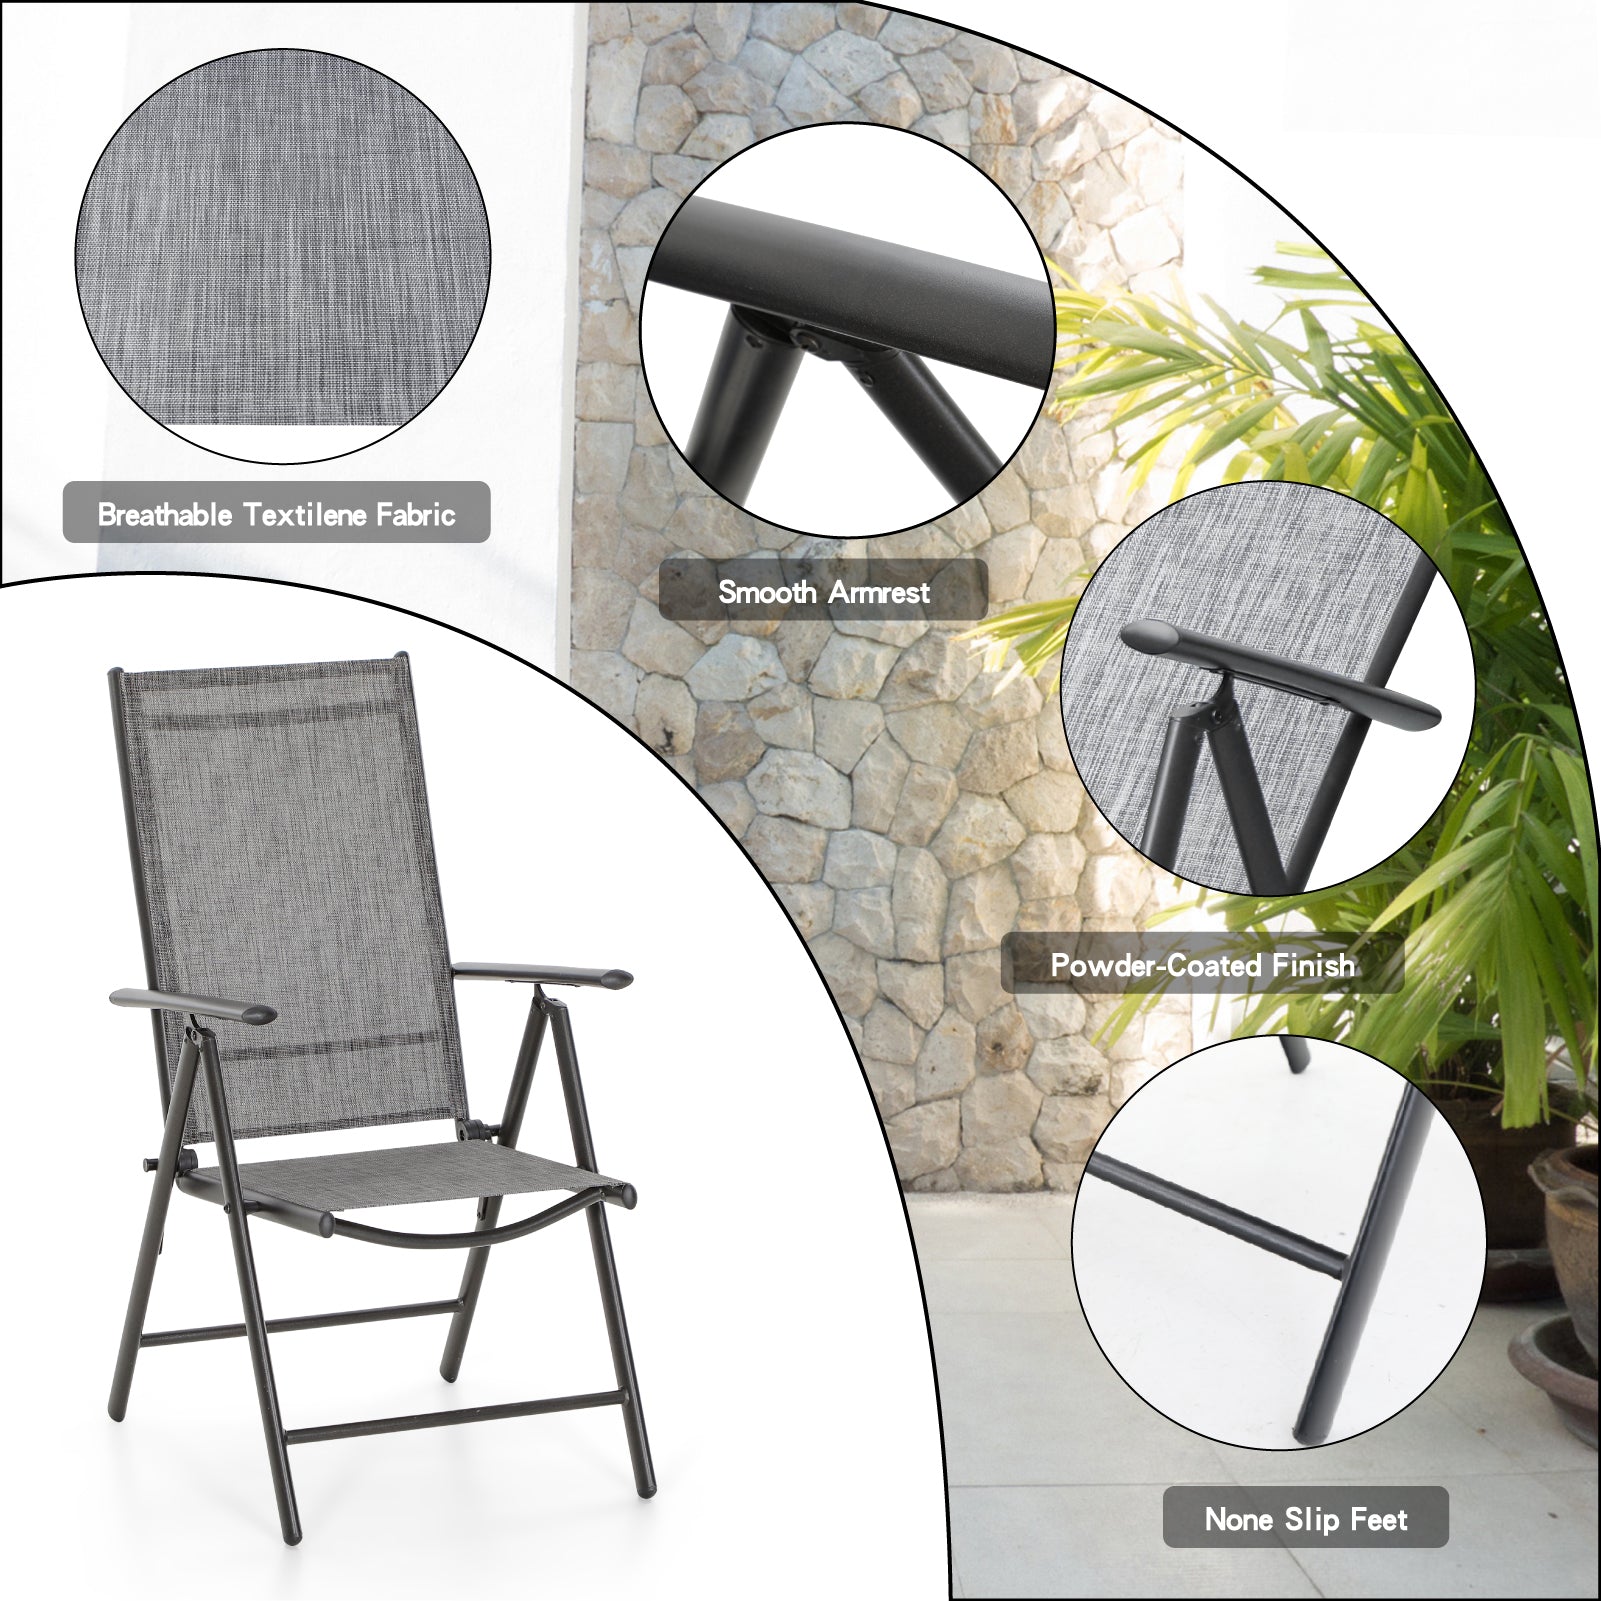 Sophia & William 5-Piece Wood-look Square Table & 4 Textilene Reclining Foldable Chairs Patio Outdoor Dining Set